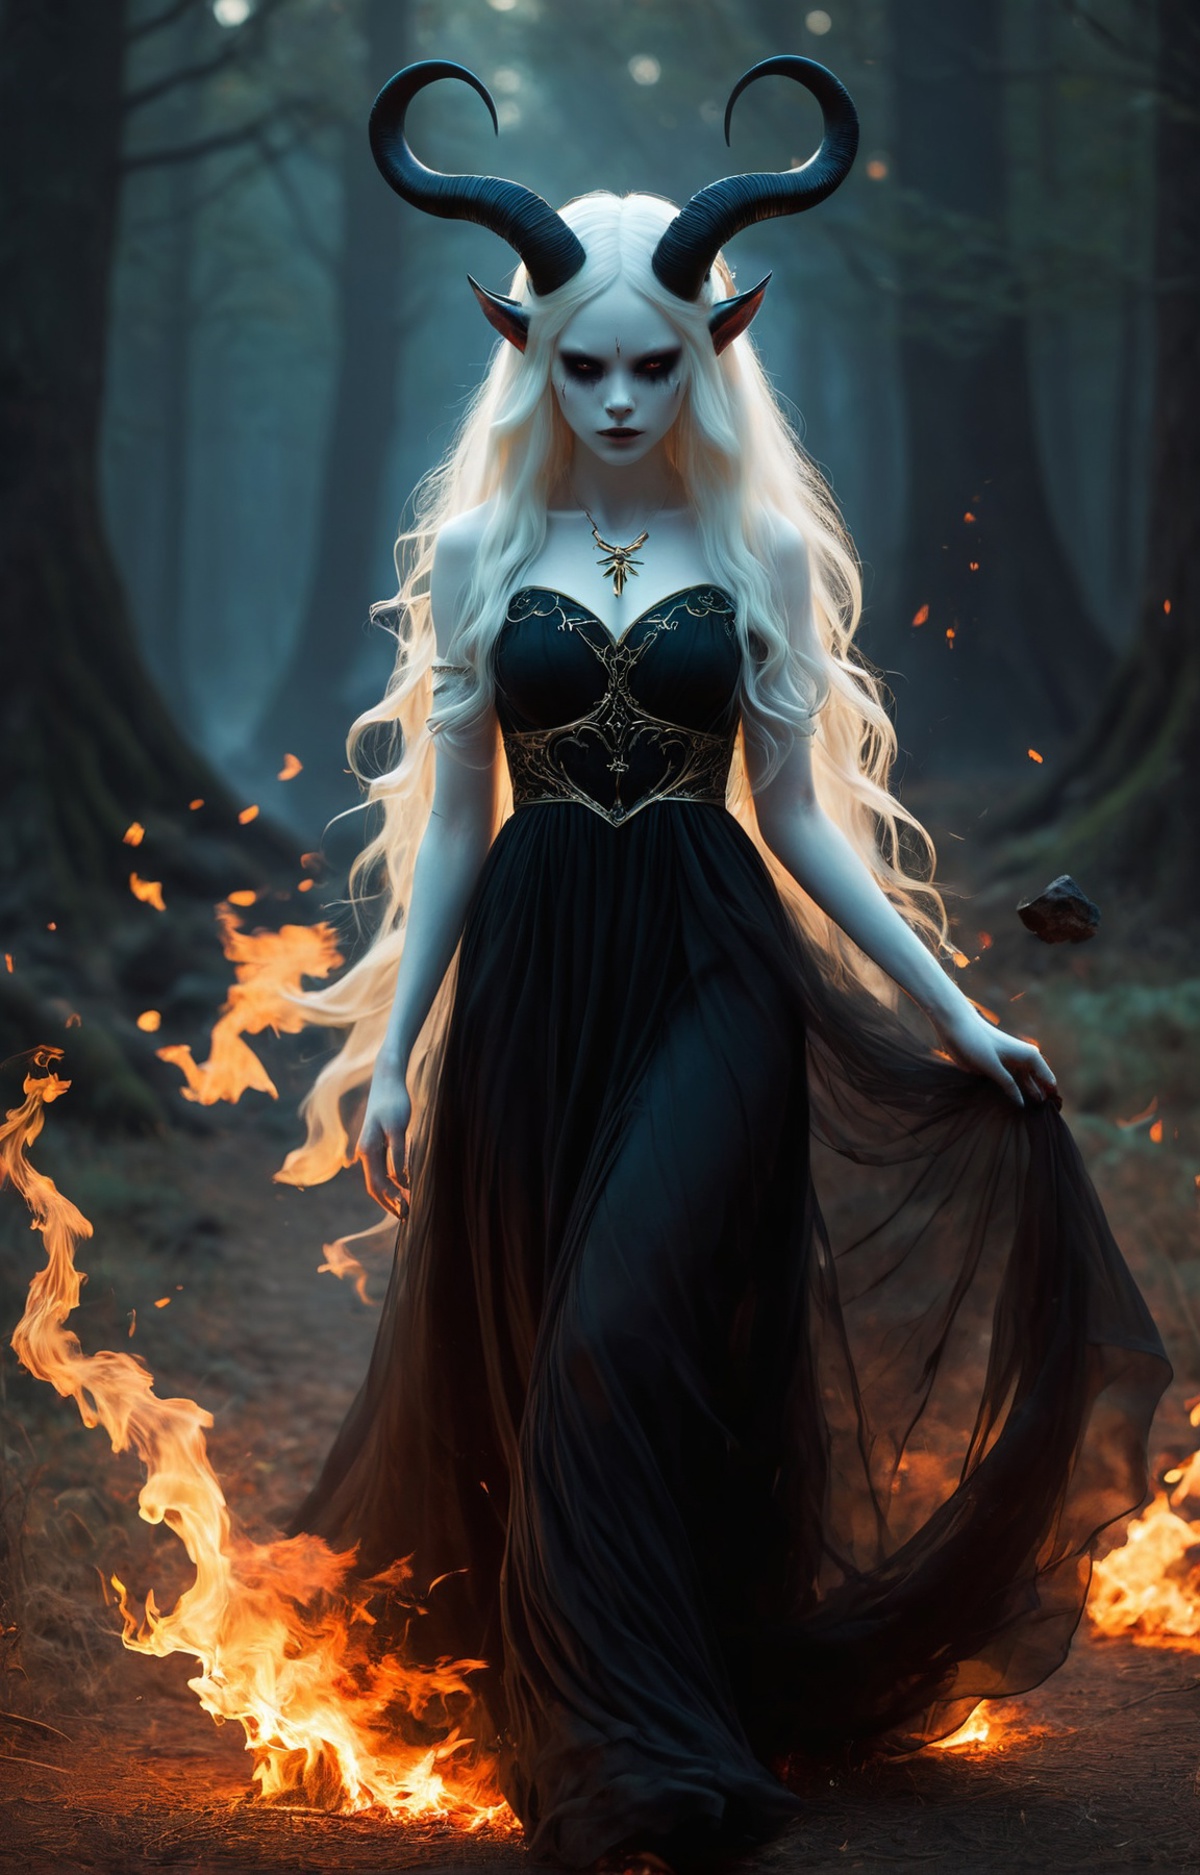 A woman with white hair, wearing a dark dress, is walking through a forest. The scene is illuminated by fire, creating a dramatic and mysterious atmosphere. The woman appears to be the main focus of the image, with her elegant attire and striking appearance. The forest in the background adds a sense of depth and intrigue to the scene, further emphasizing the enchanting and captivating nature of the image.